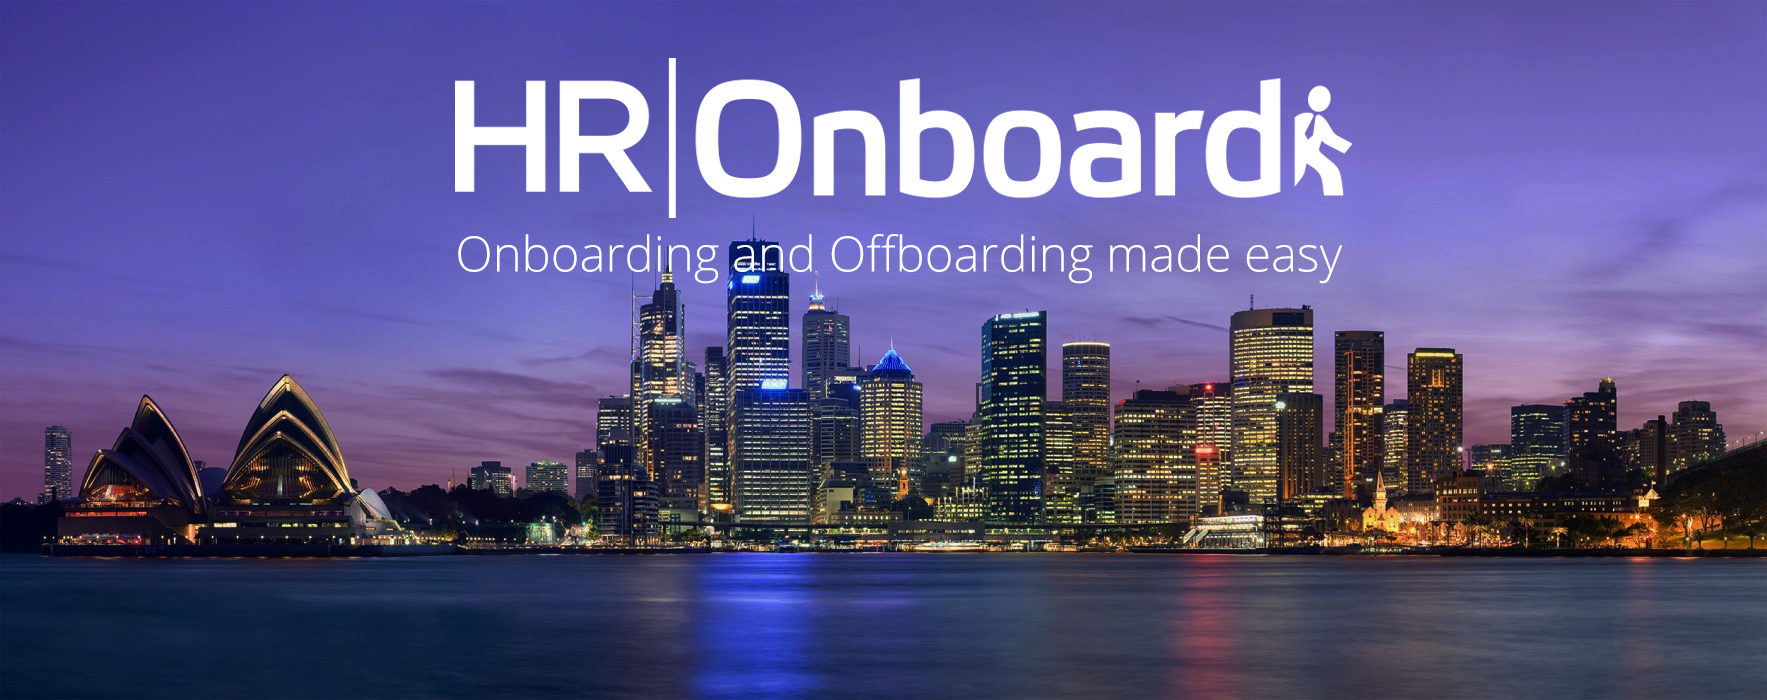 HROnboard is going to ATC Sydney